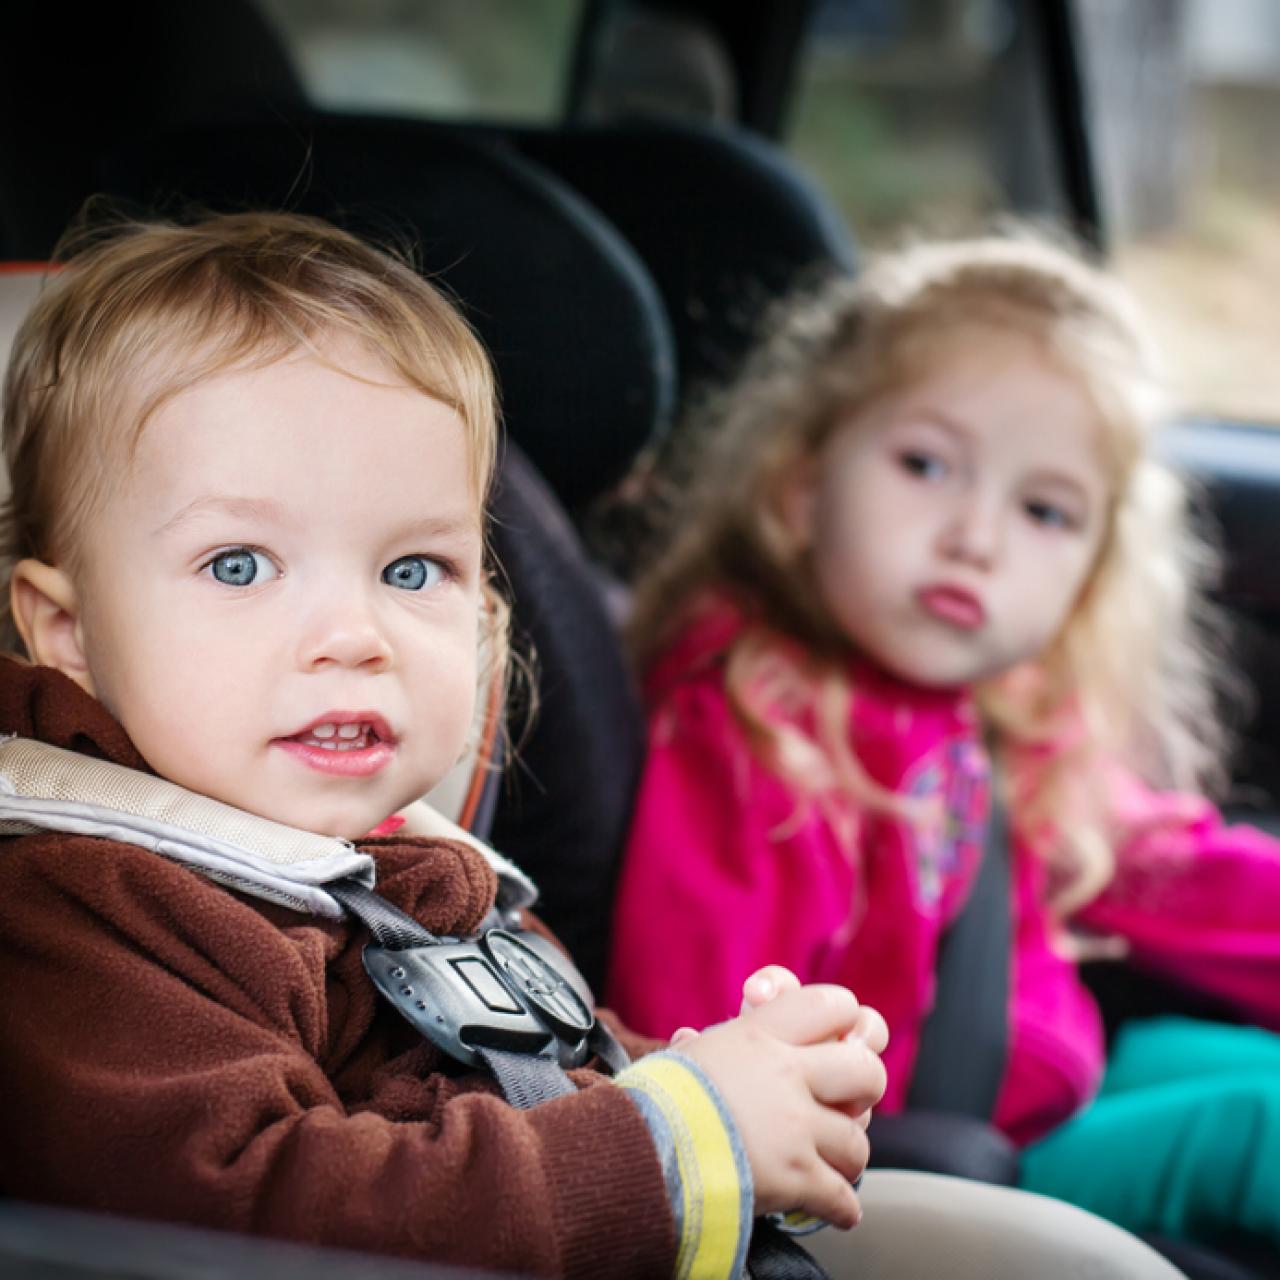 Shopping For A Car Booster Seat For Your Child Just Got Easier